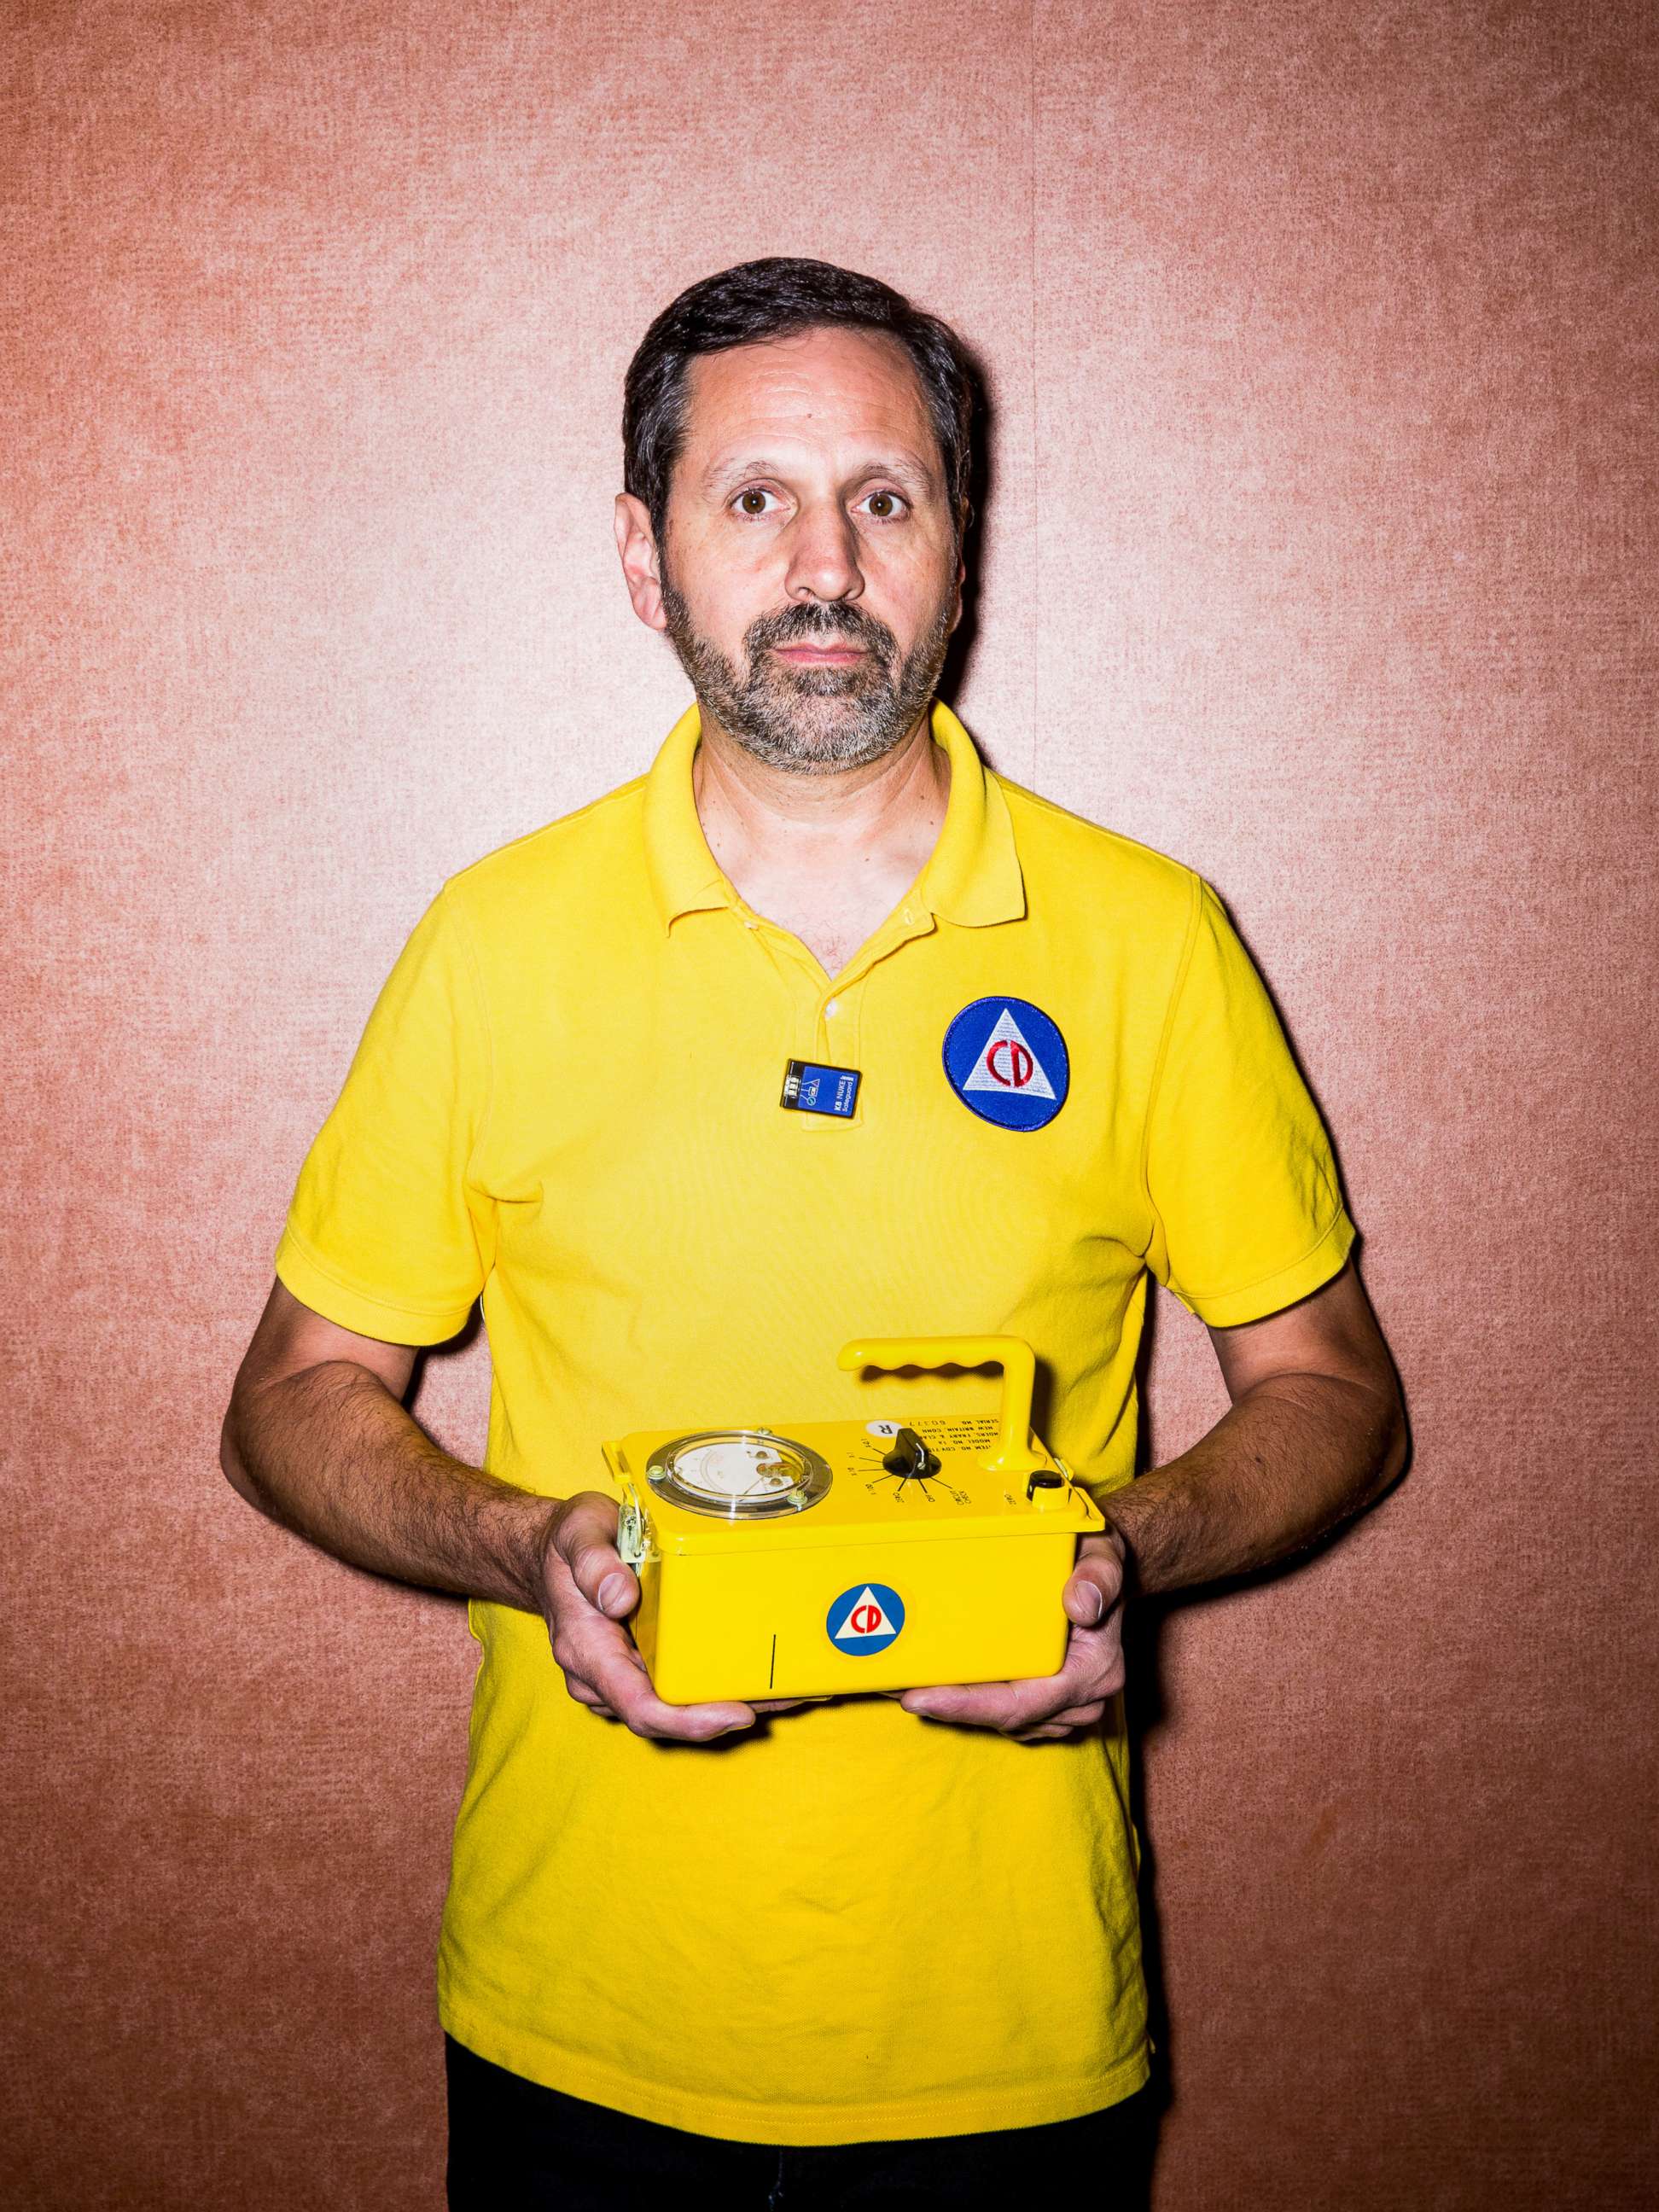 PHOTO: Craig Douglas holds a radiological survey meters, also known as as  Geiger counter, at the expo